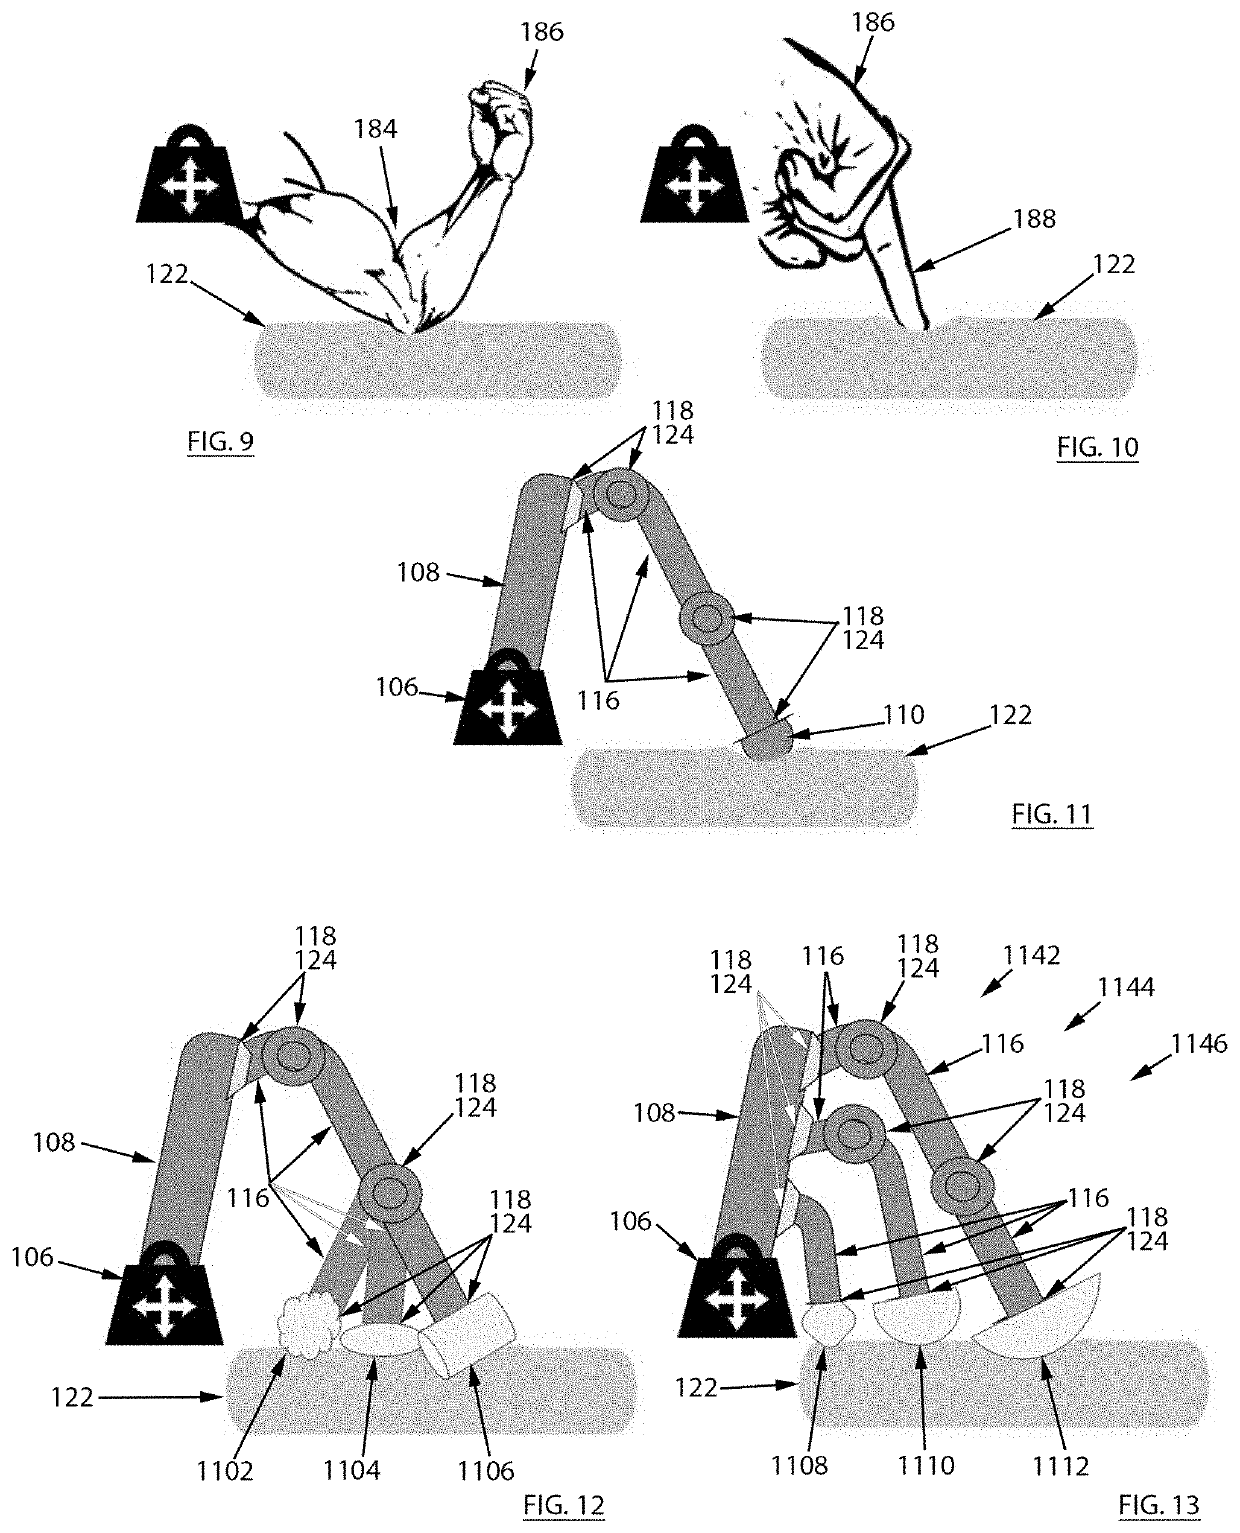 Treatment force application device